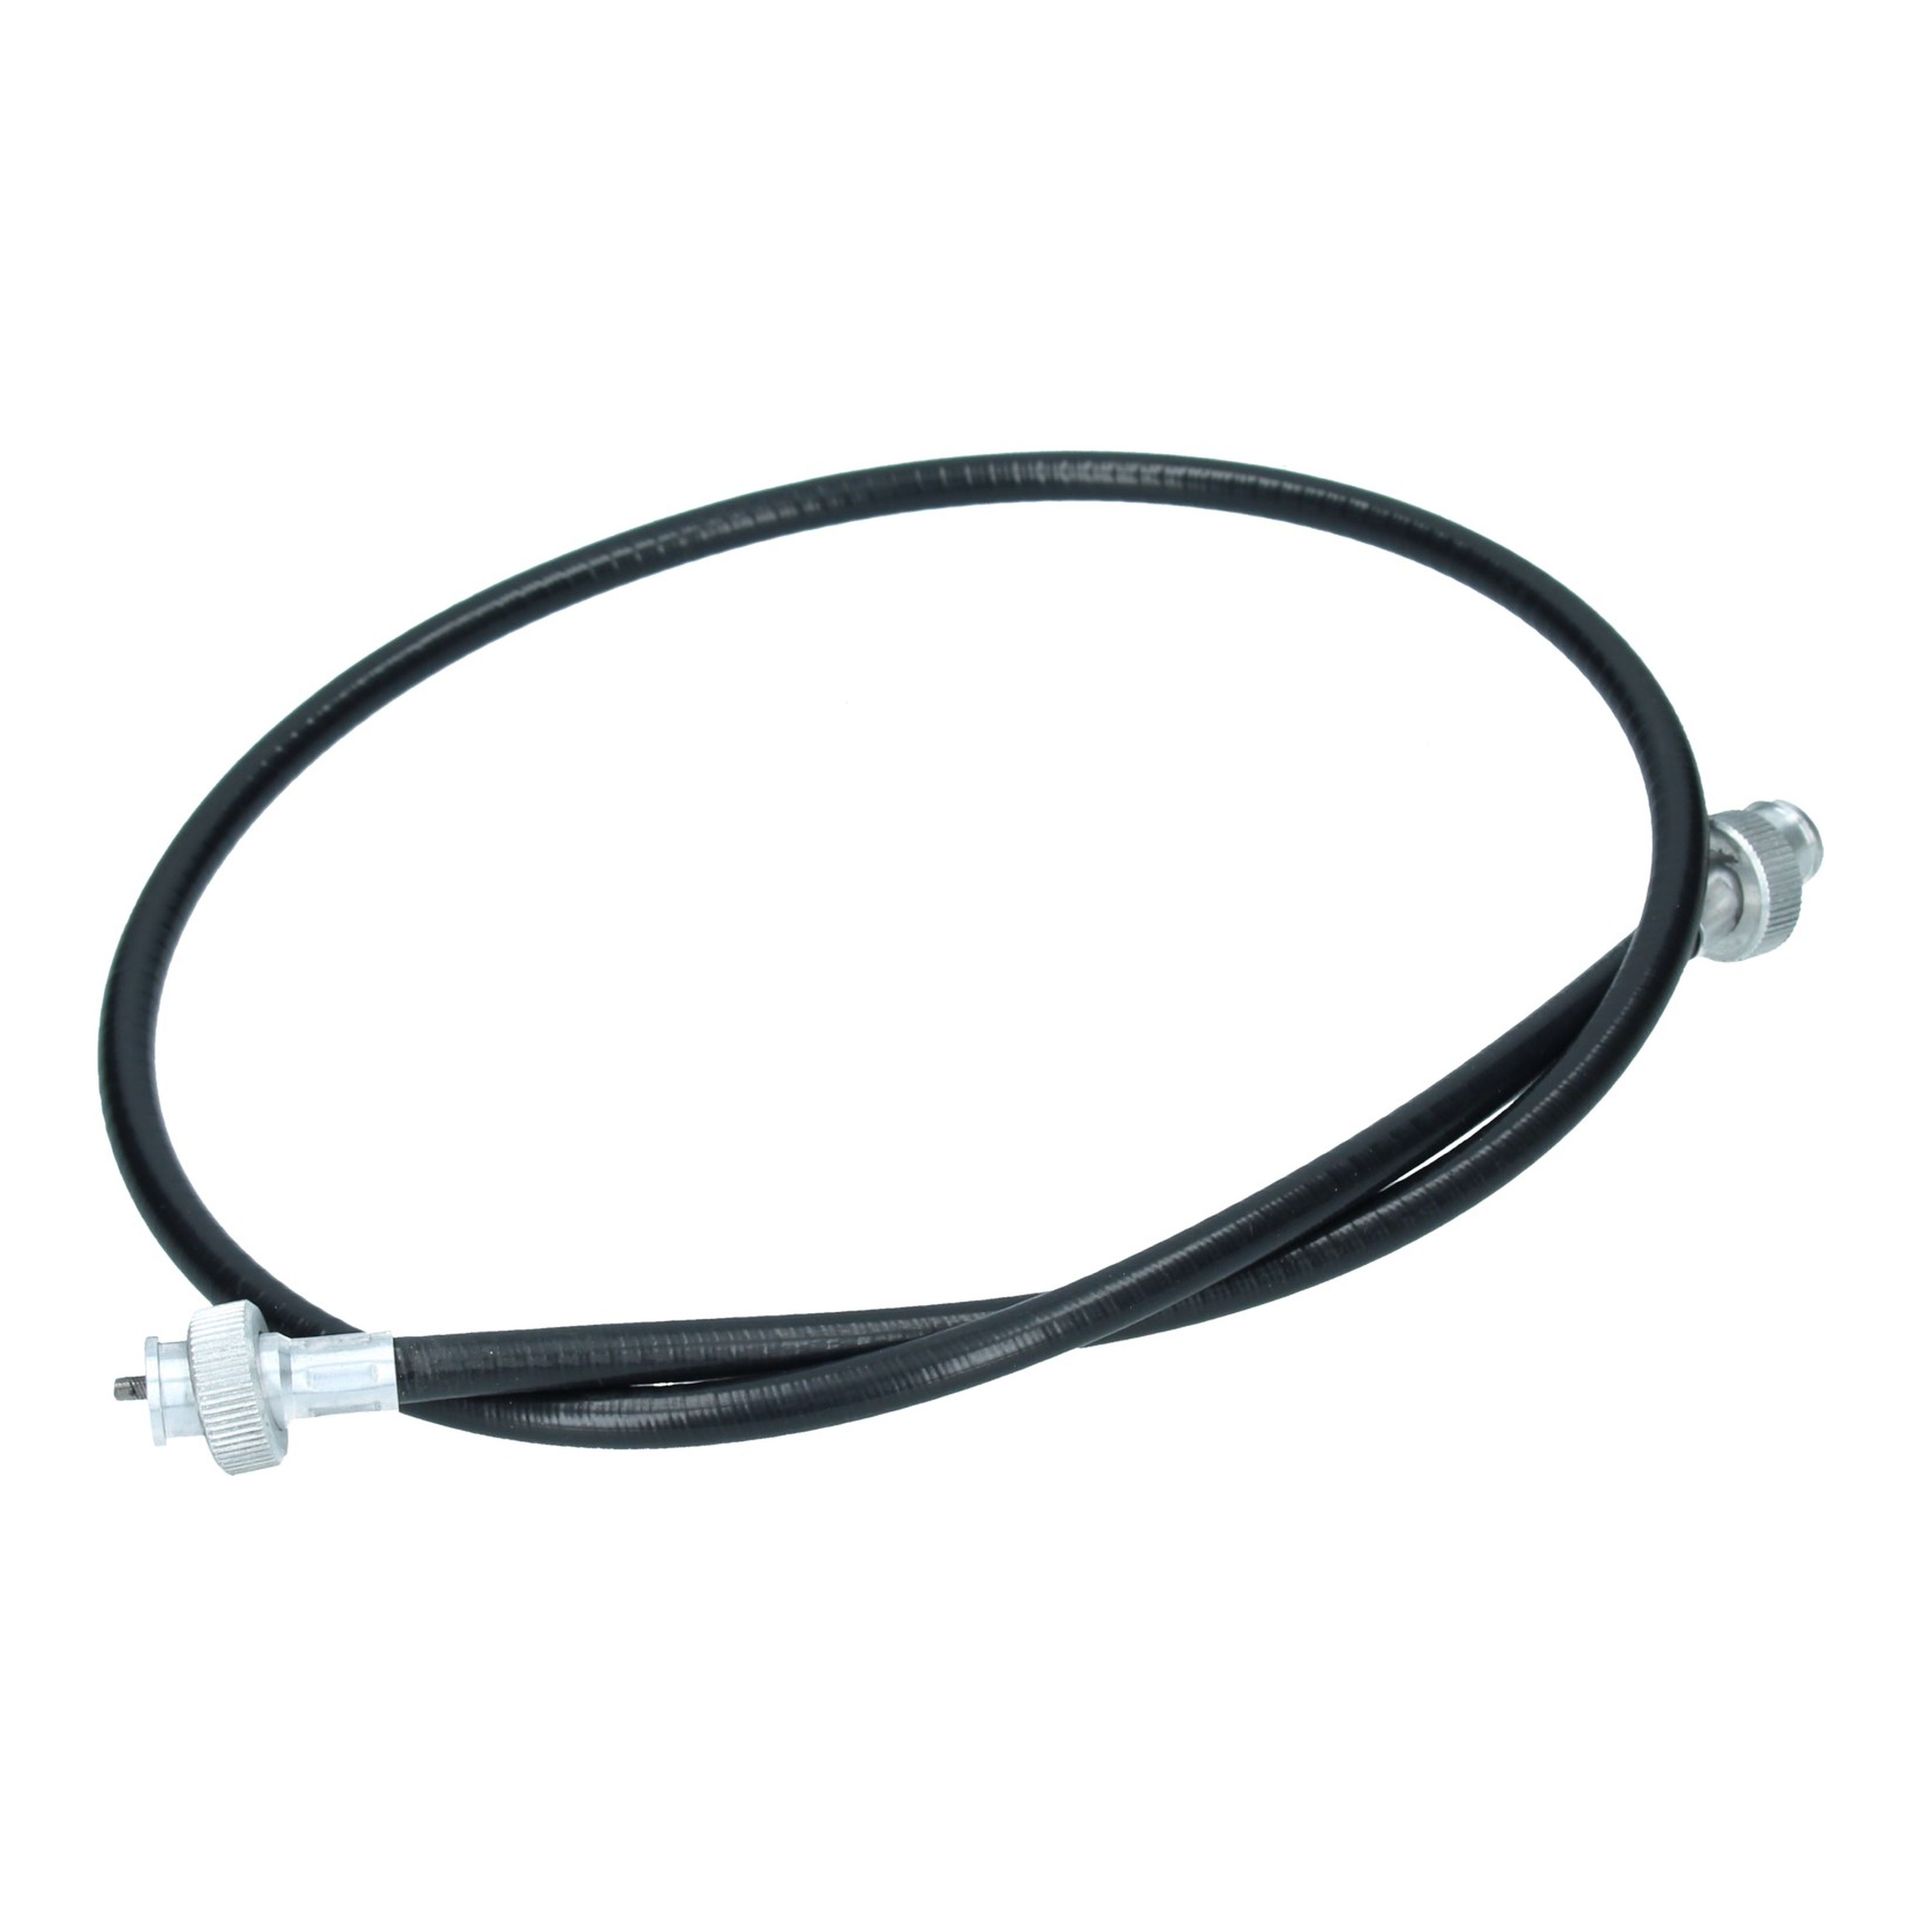 Rev Counter Cable 275 LHD (71cm long)